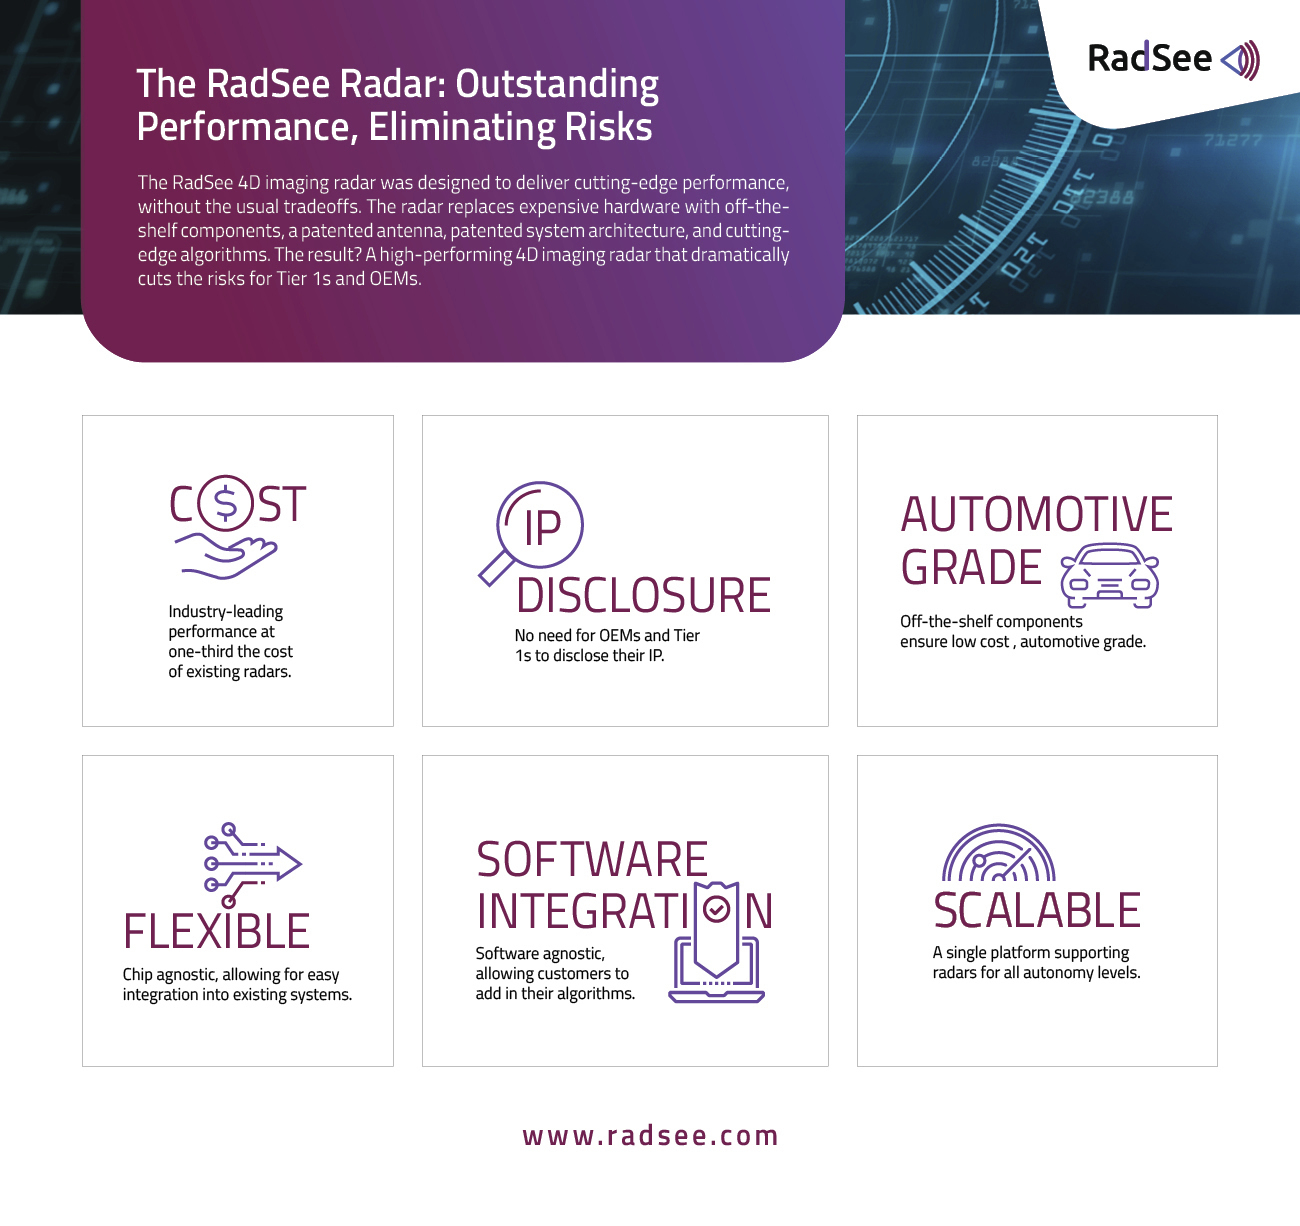 RadSee Launches High-Performance Automotive 4D Imaging Radar that Slashes Costs